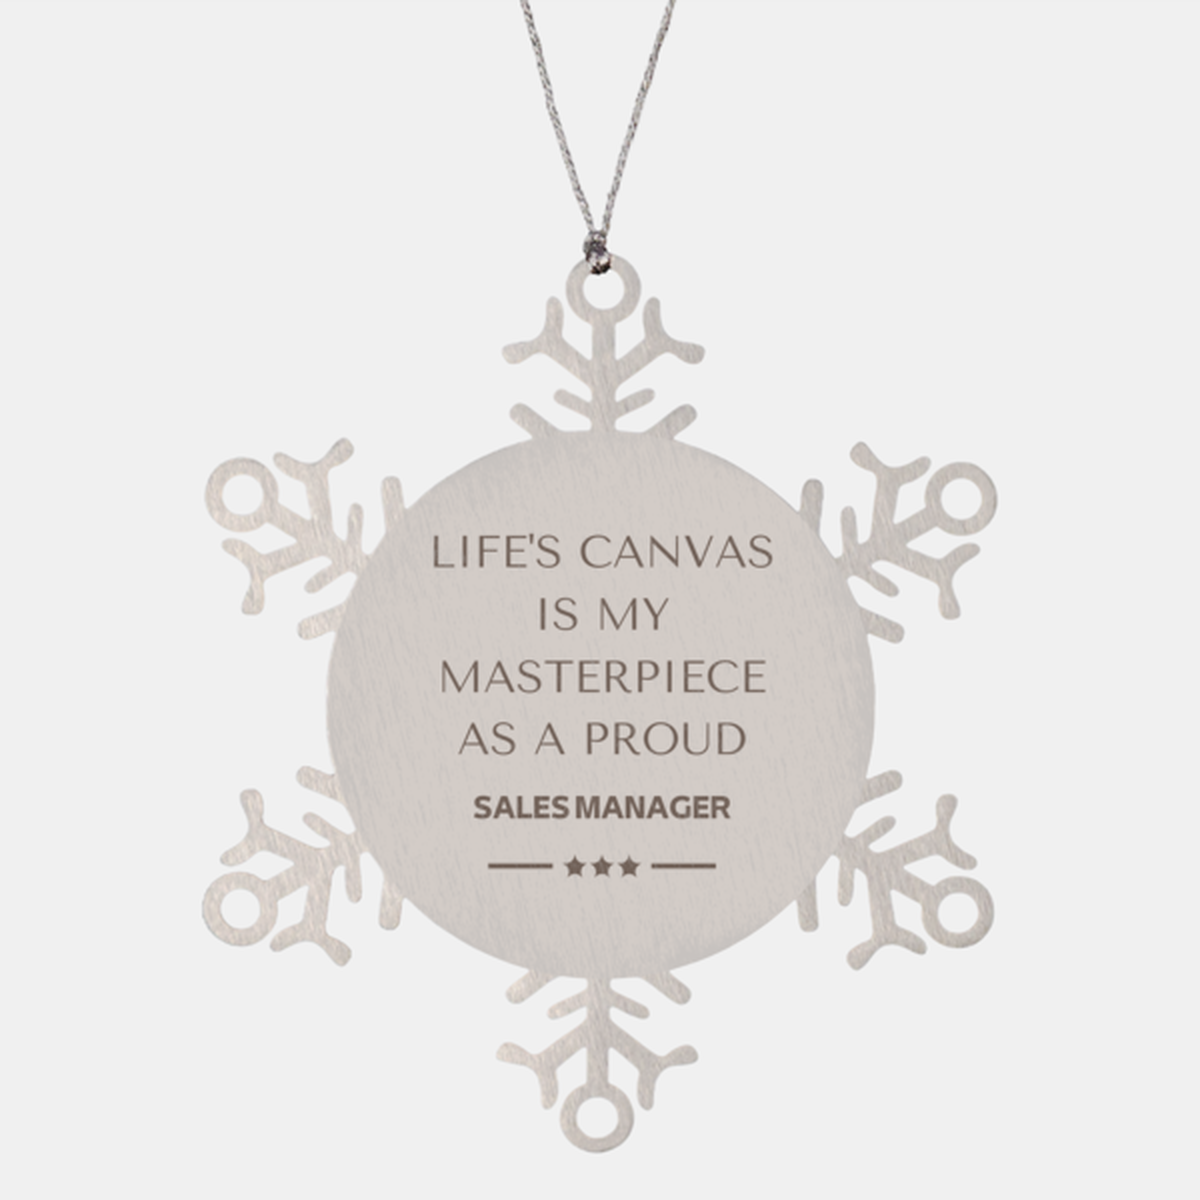 Proud Sales Manager Gifts, Life's canvas is my masterpiece, Epic Birthday Christmas Unique Snowflake Ornament For Sales Manager, Coworkers, Men, Women, Friends